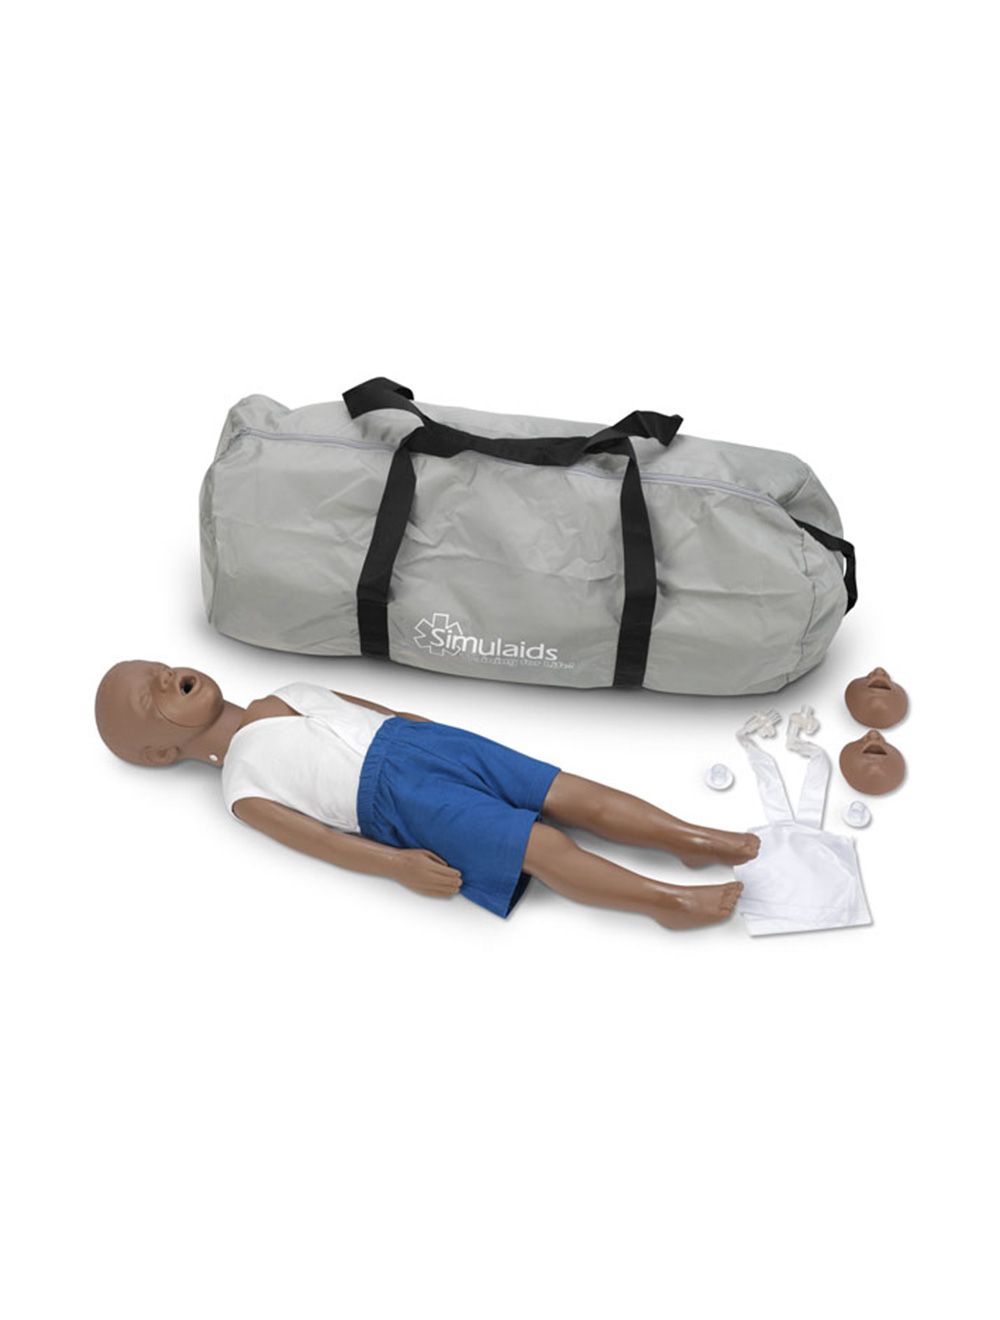 Full-body, 3-year-old, pediatric manikin for realistic training in pediatric CPR and rescue